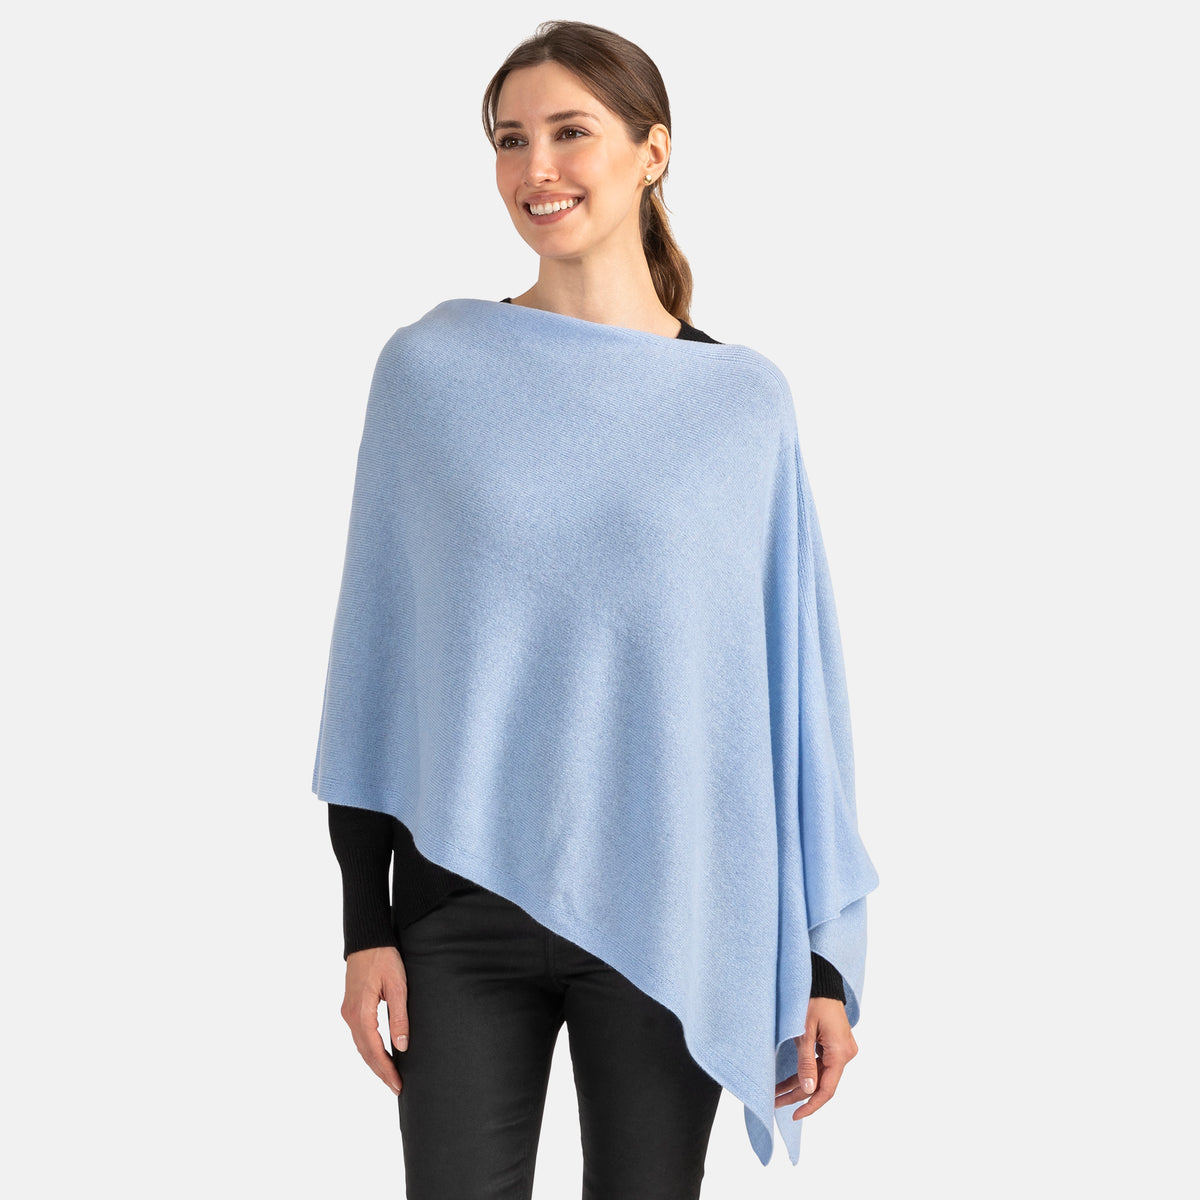 Picture of a woman wearing an asymmetrical ove the head poncho, light blue.